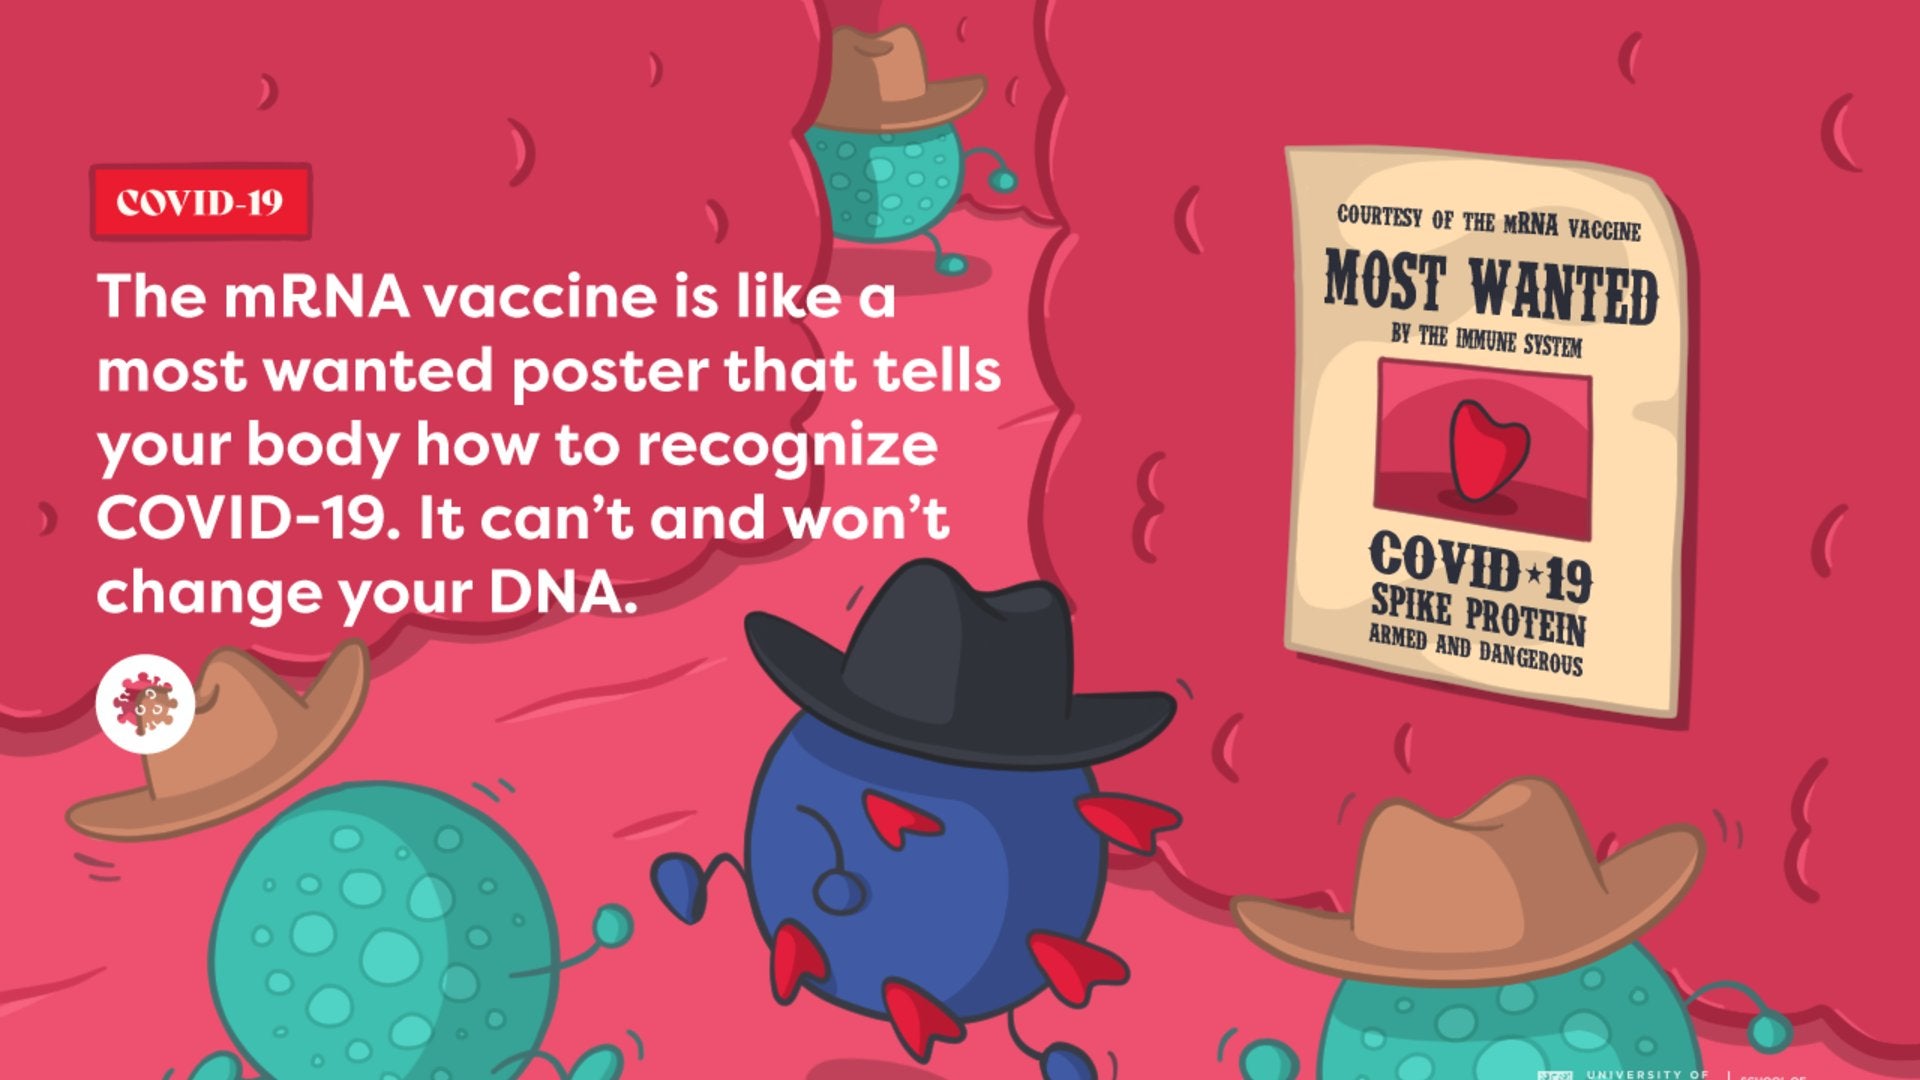 mRNA vaccine is like a wanted poster that tells your body how to recognized COVID-19. It can't and won't change your DNA